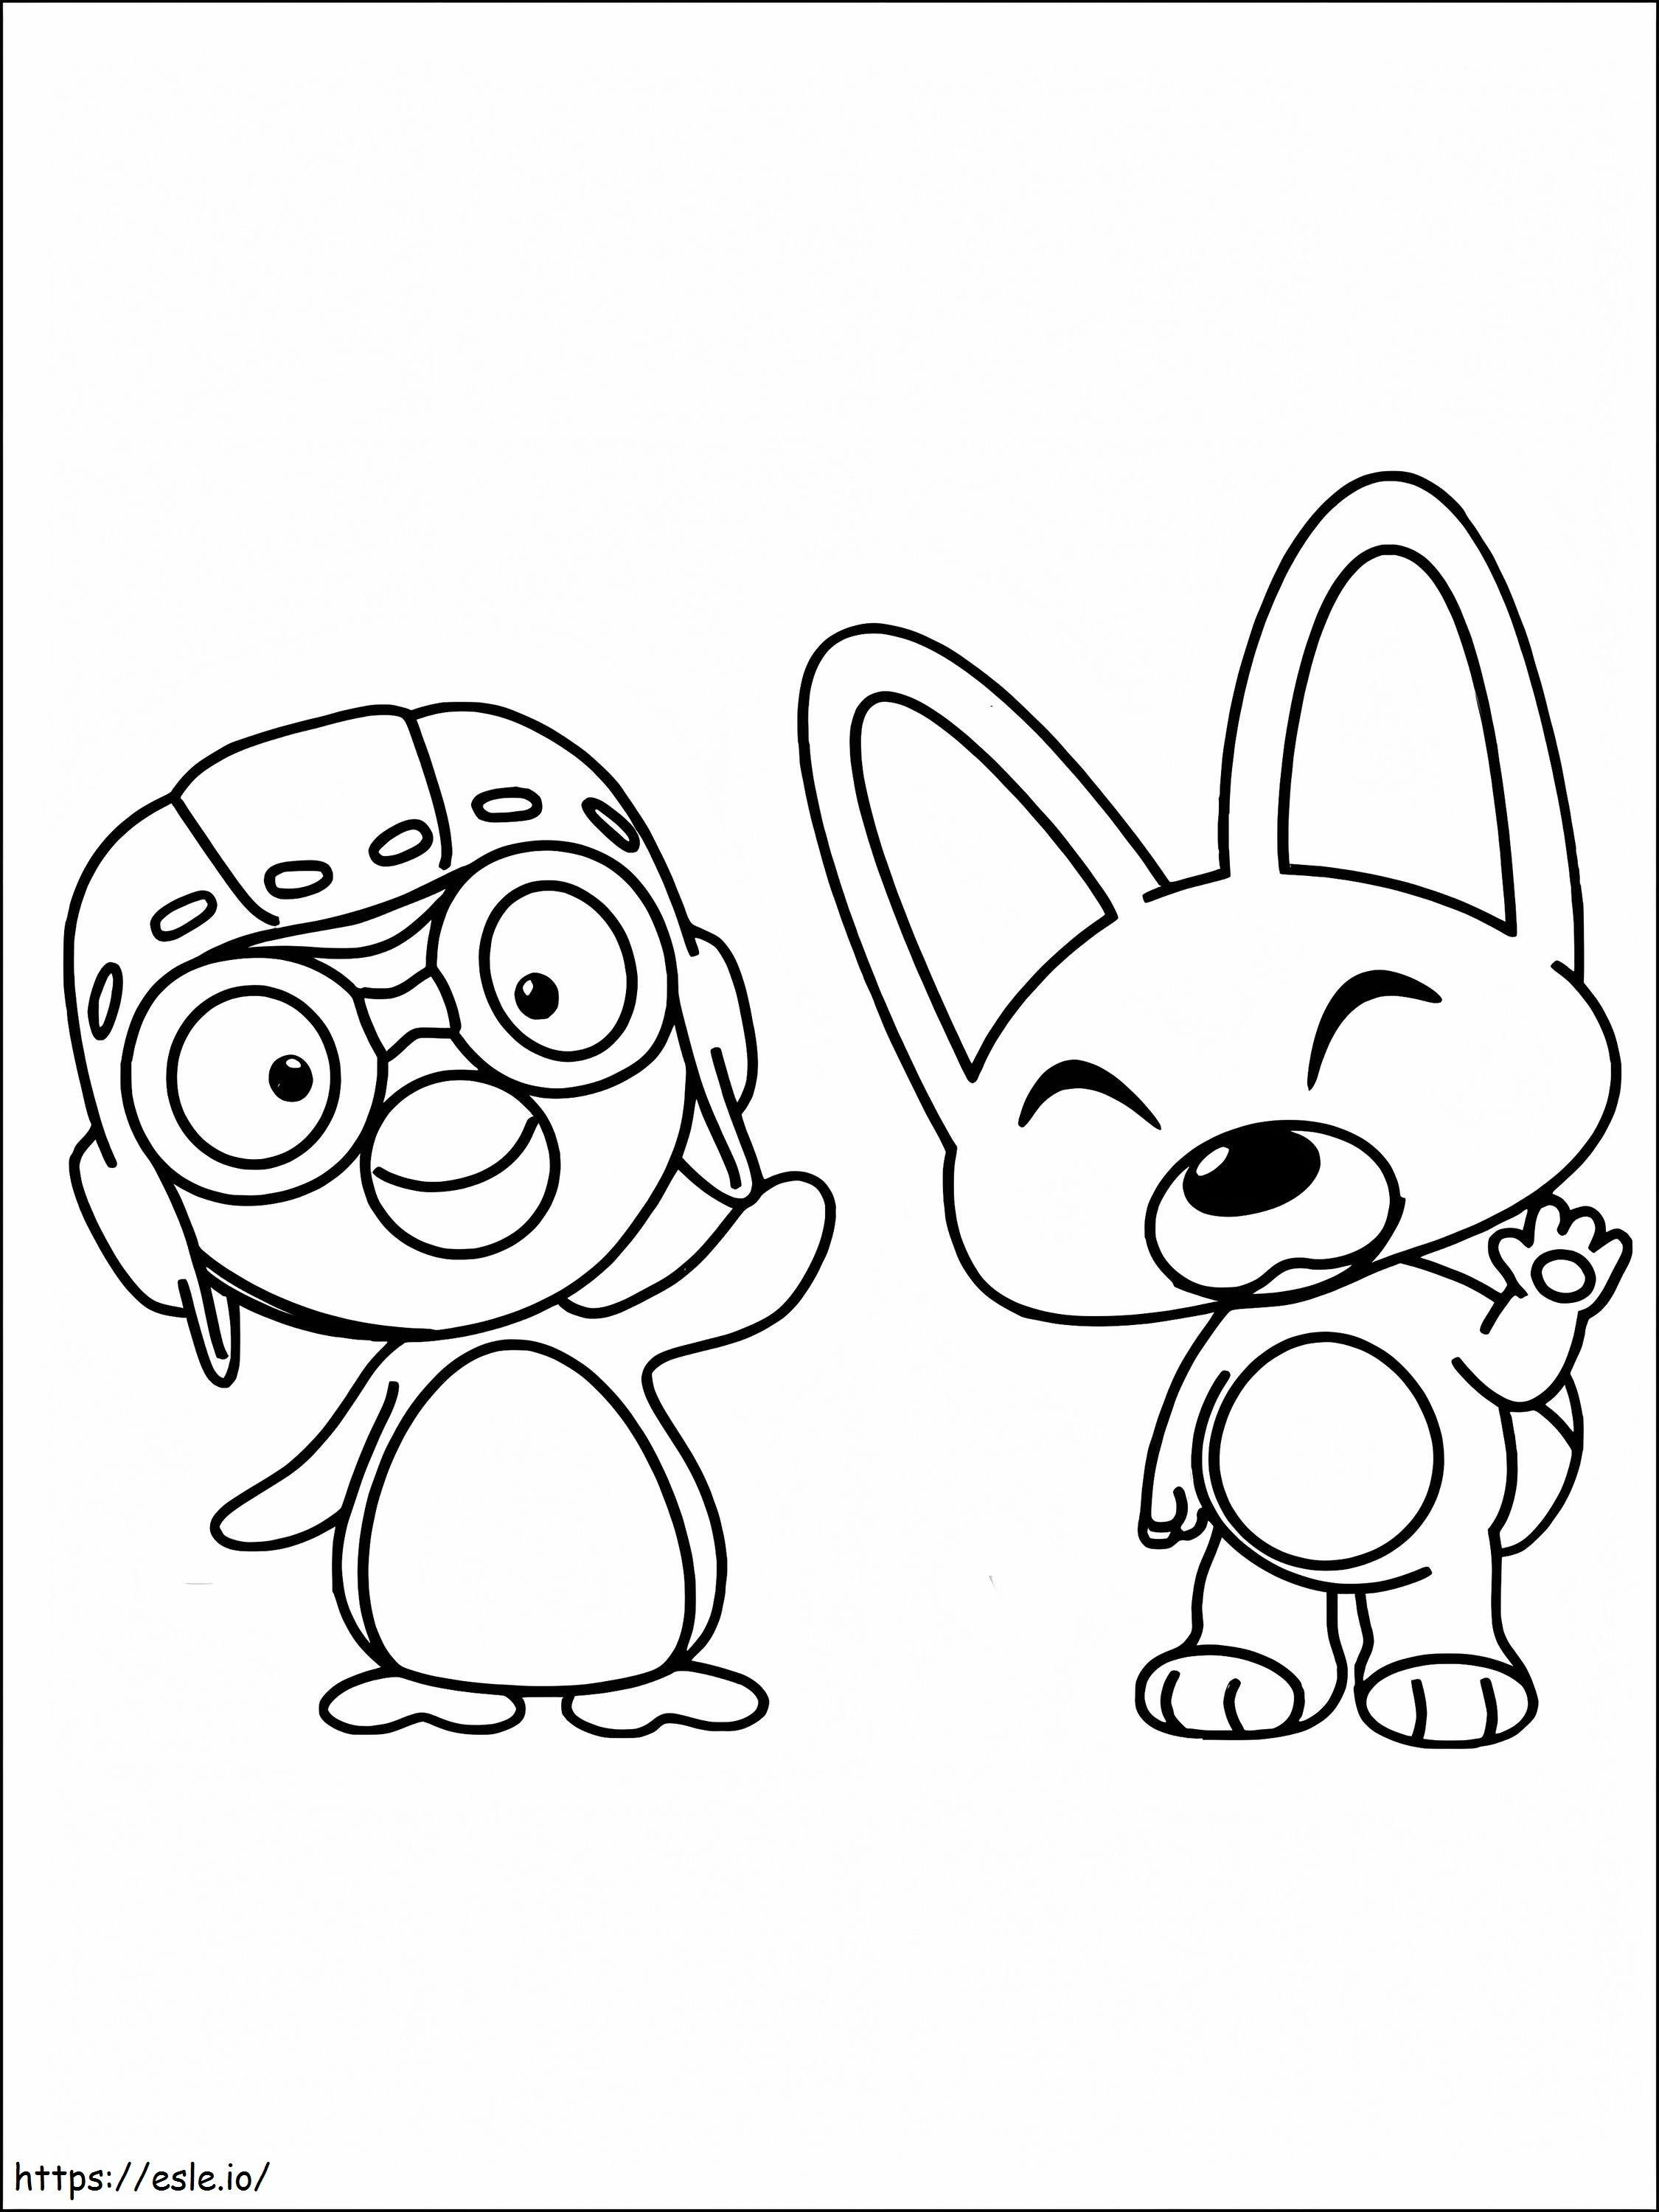 Smiling Pororo And Eddy coloring page